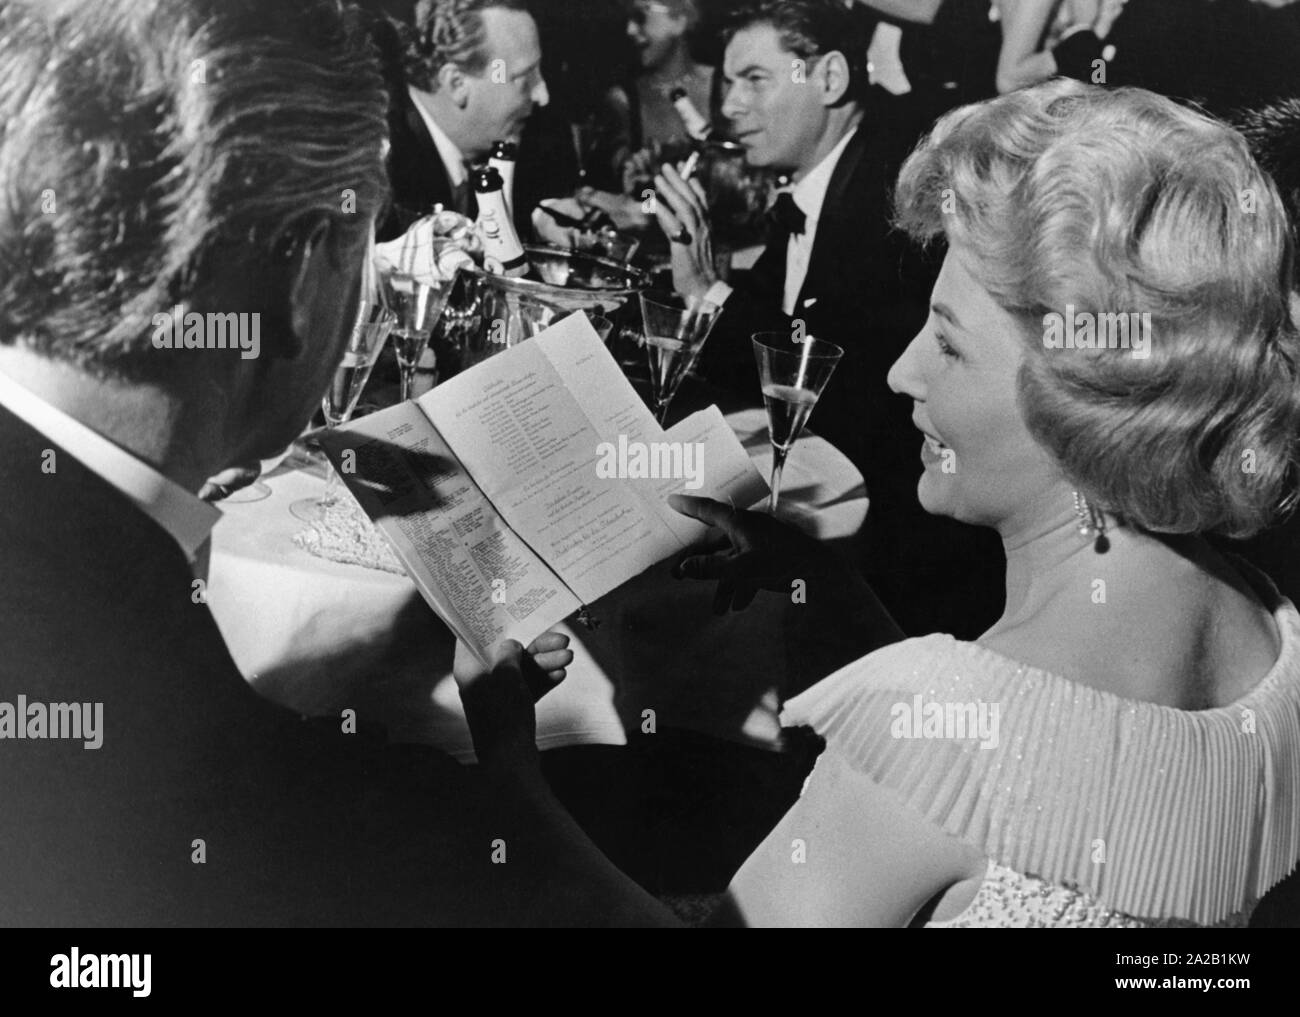 The high society meets (presumably) at the Bal pare (grand ball) of the Muenchner Illustrierte. Stock Photo